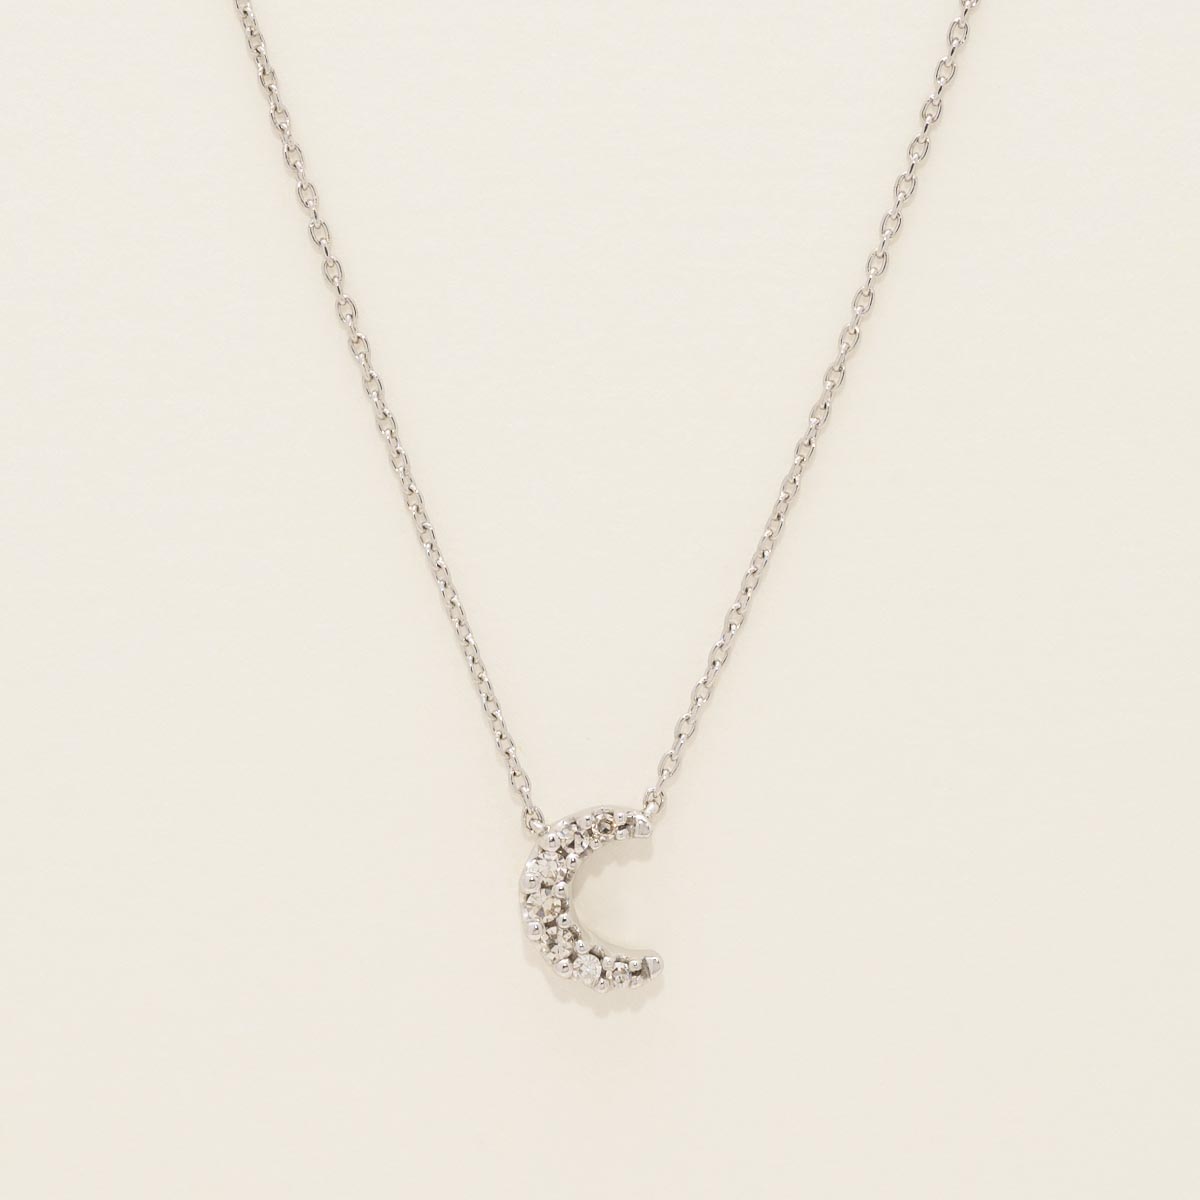 Diamond Petite Crescent Necklace in 10kt White Gold (1/20ct tw)